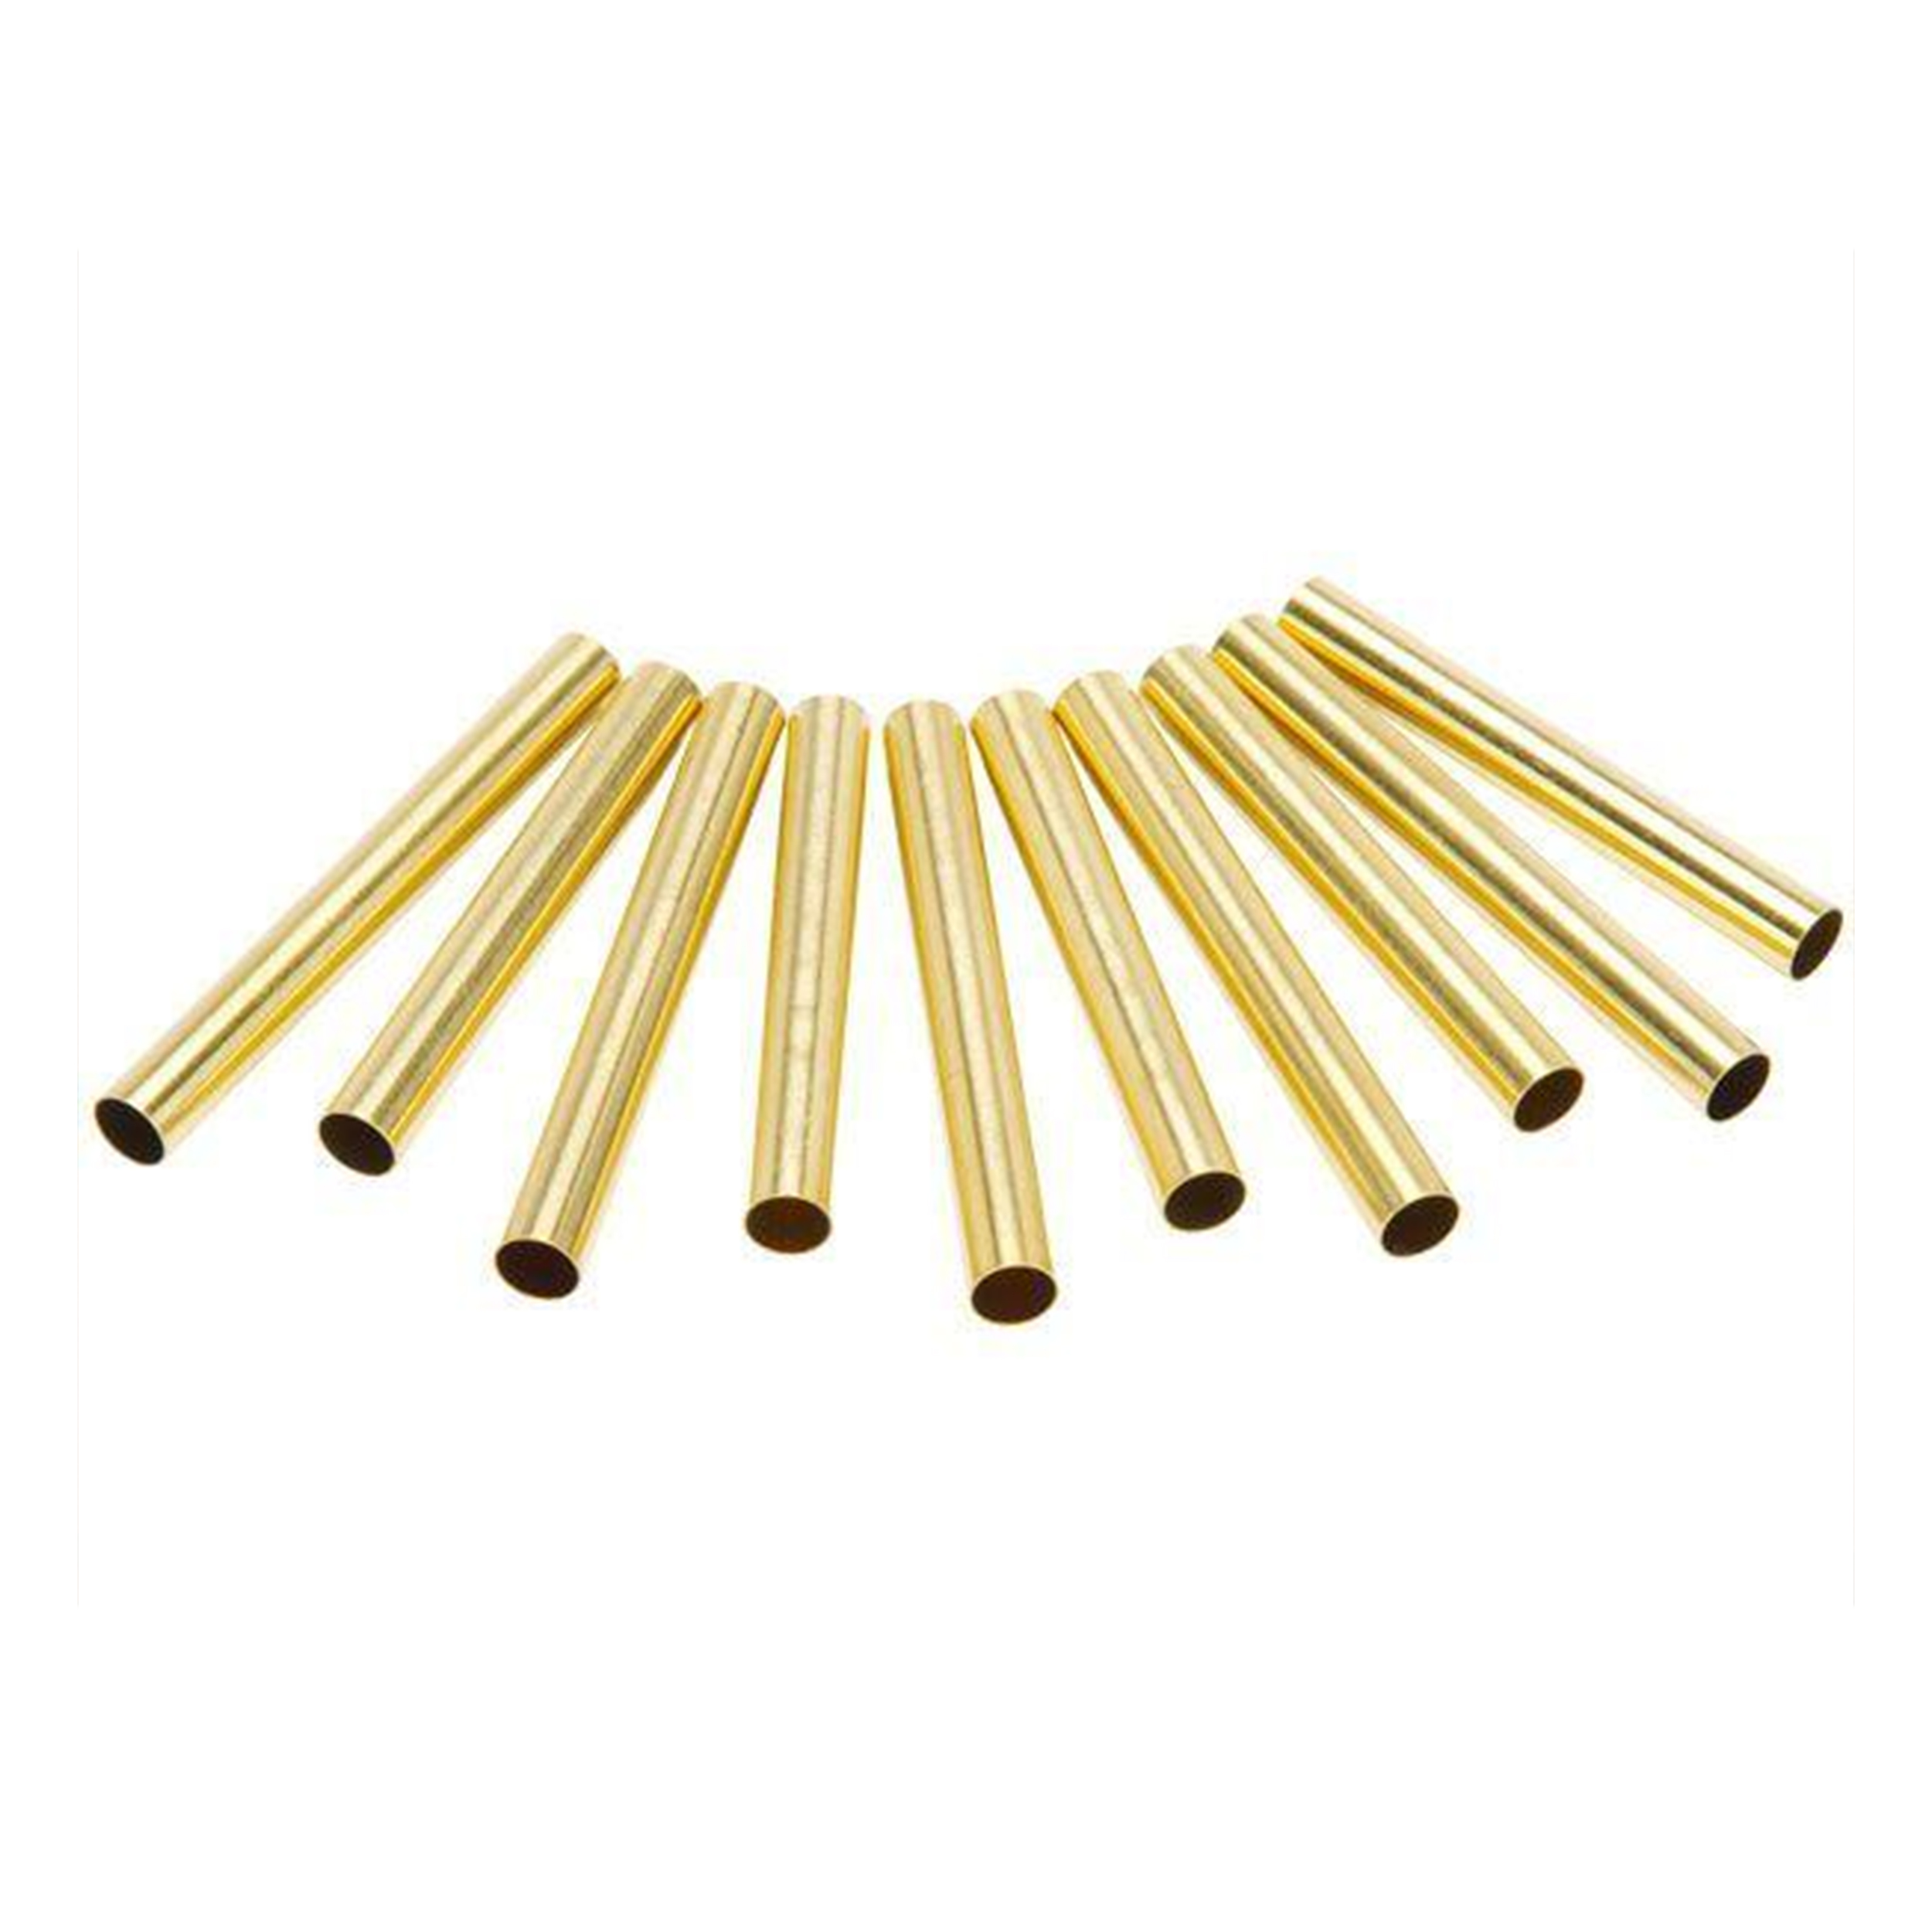 Replacement Brass Tubes For Nano Tip Stylus Kit